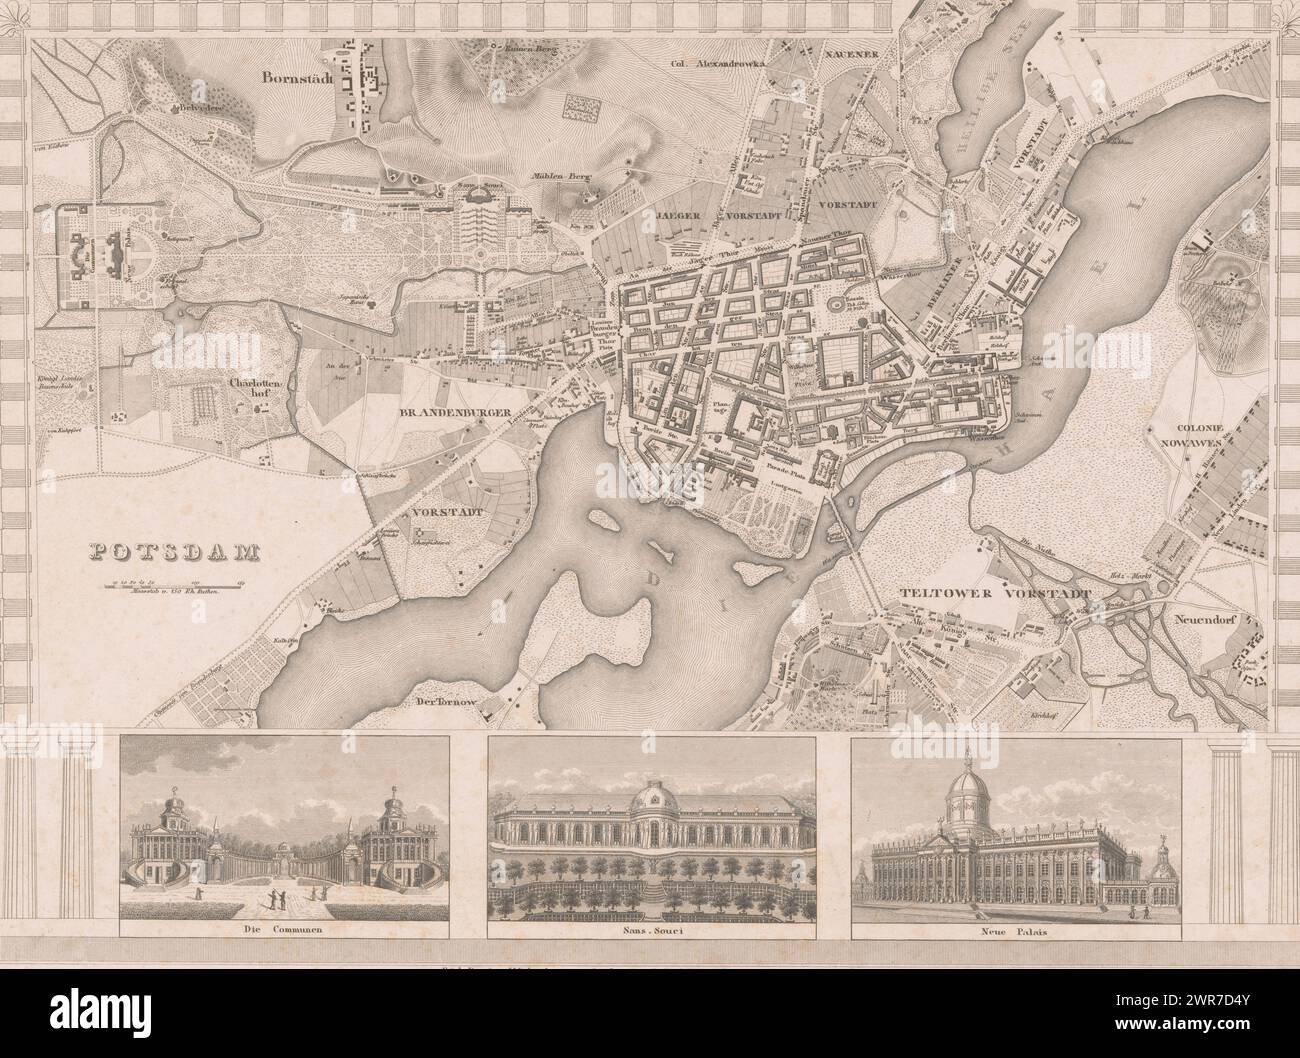 Map of Potsdam with three building details, print maker: J. Zipter, printer: Bibliographisches Institut, publisher: Bibliographisches Institut, Hildburghausen, 1828 - 1874, paper, steel engraving, height 270 mm × width 355 mm, print Stock Photo